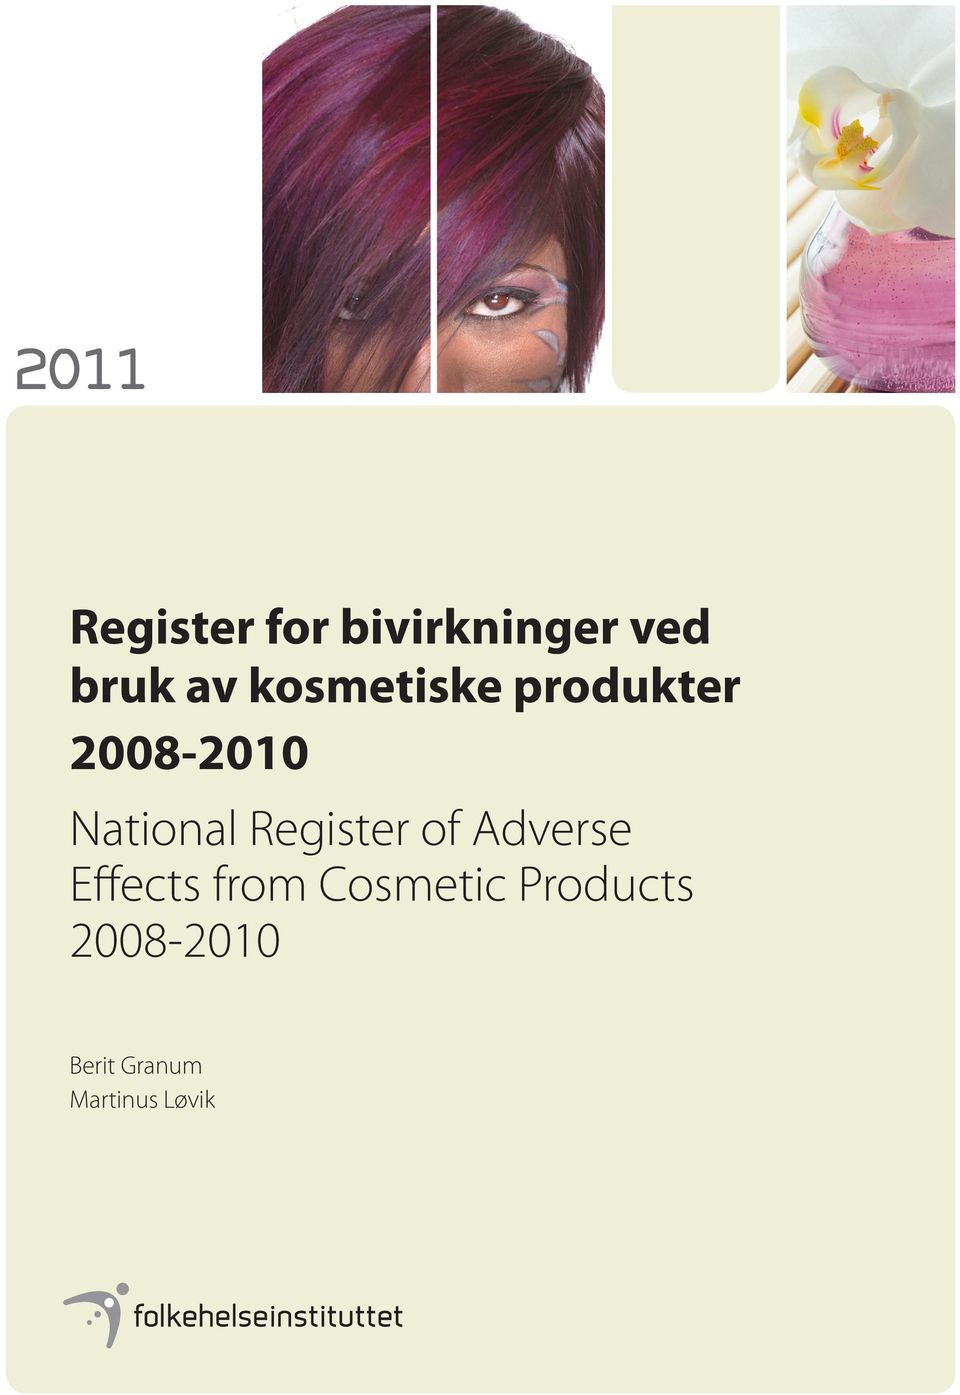 Register of Adverse Effects from Cosmetic